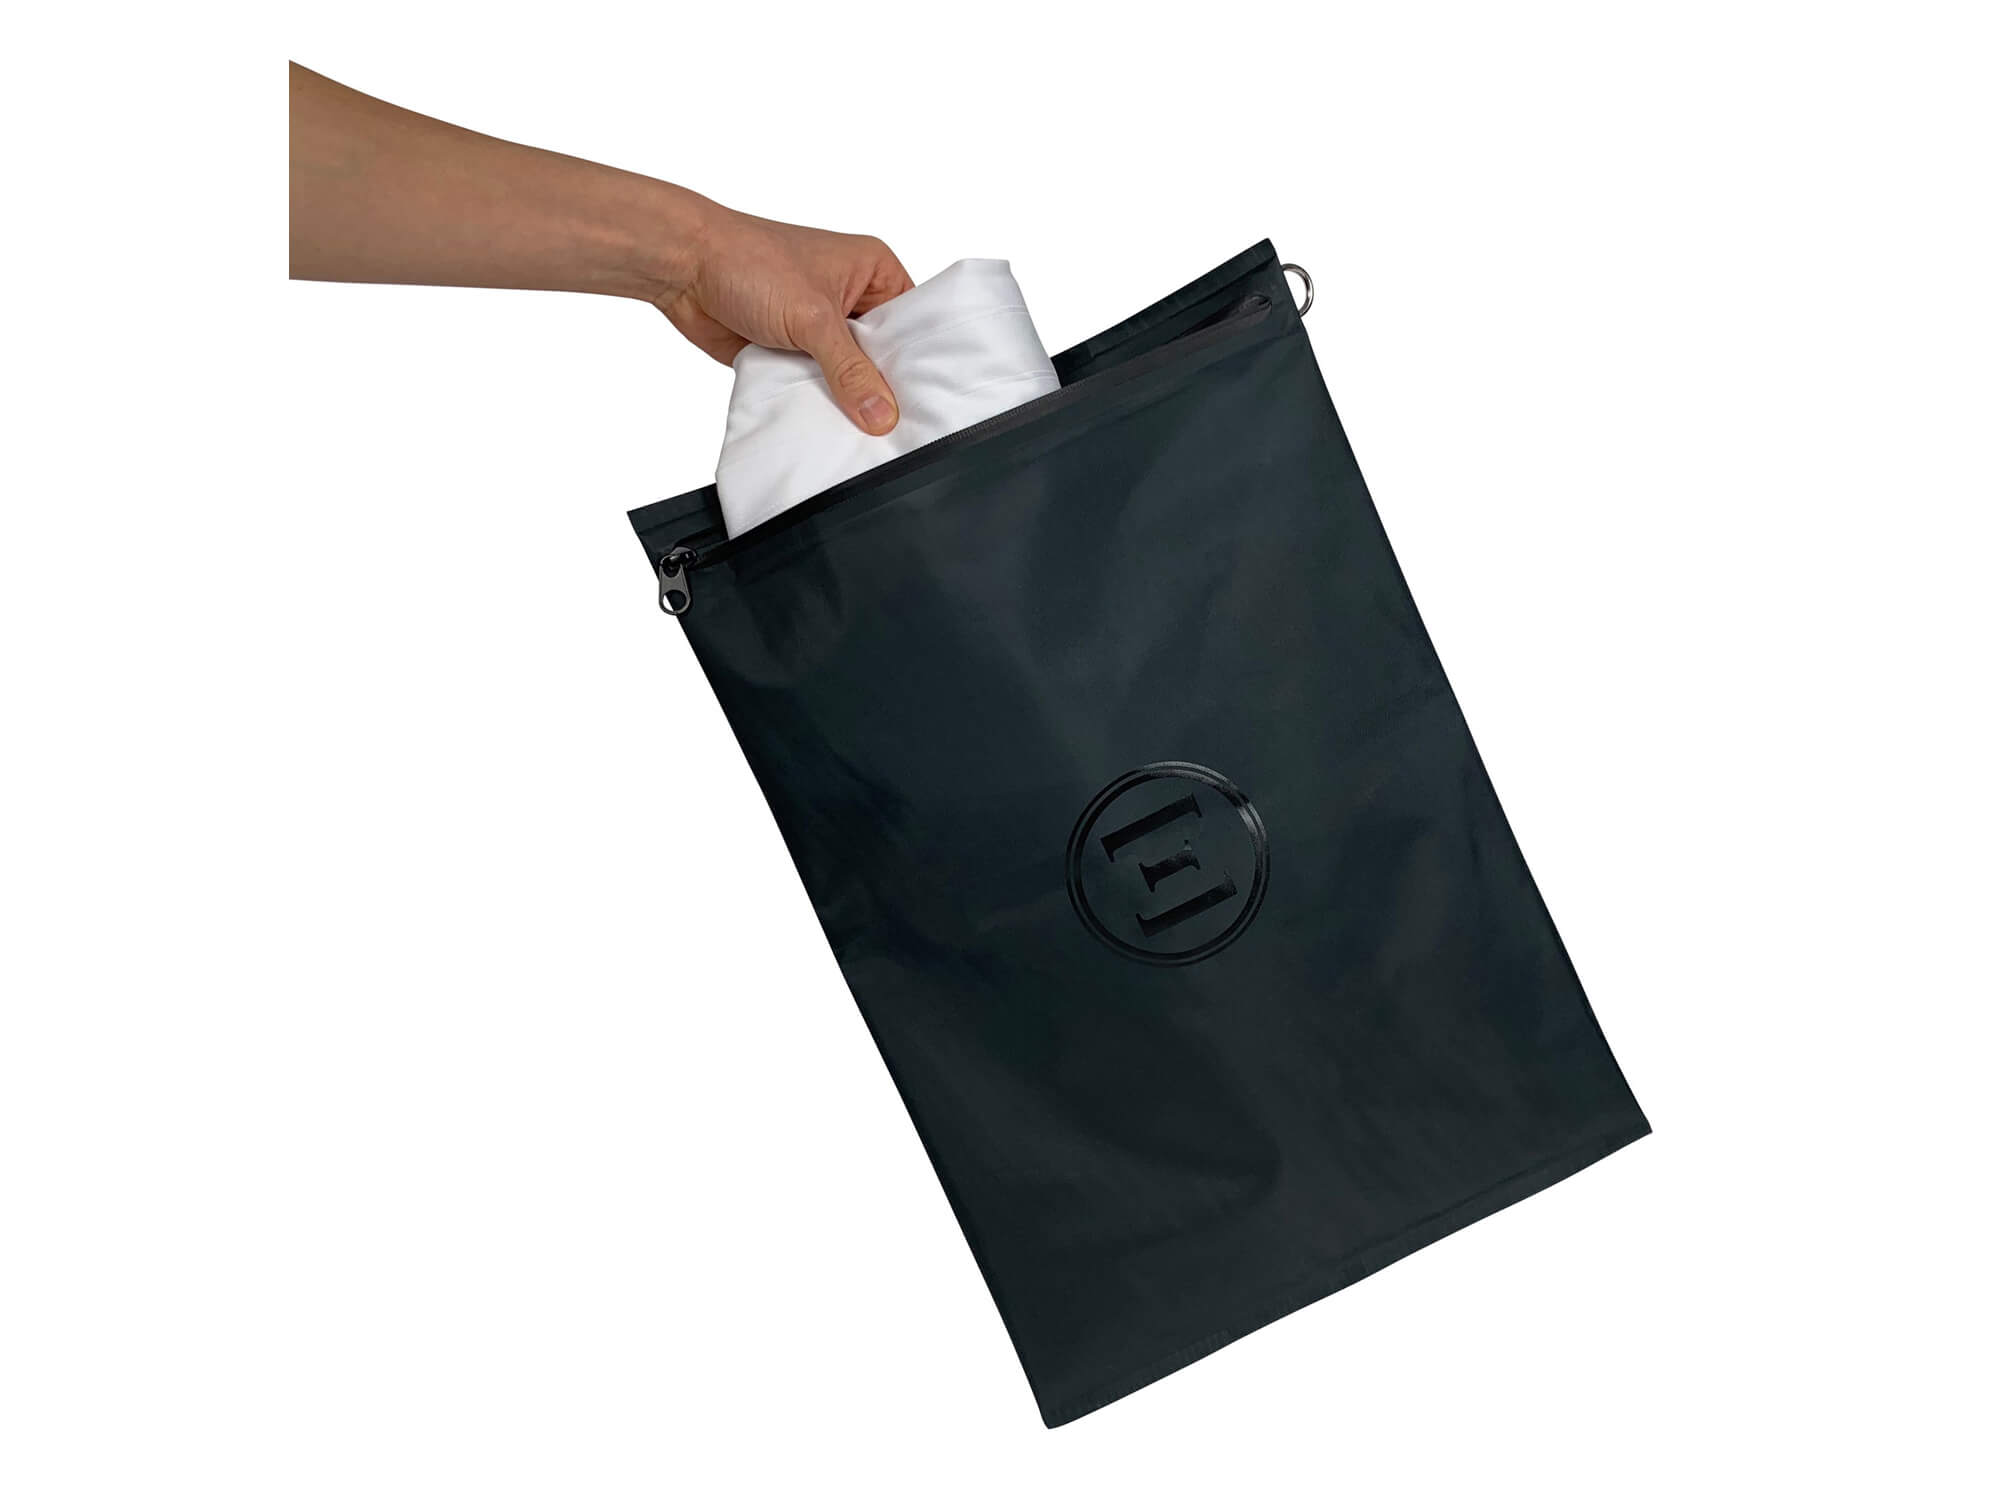 Epirus Waterproof Wet Bag holding used clothes